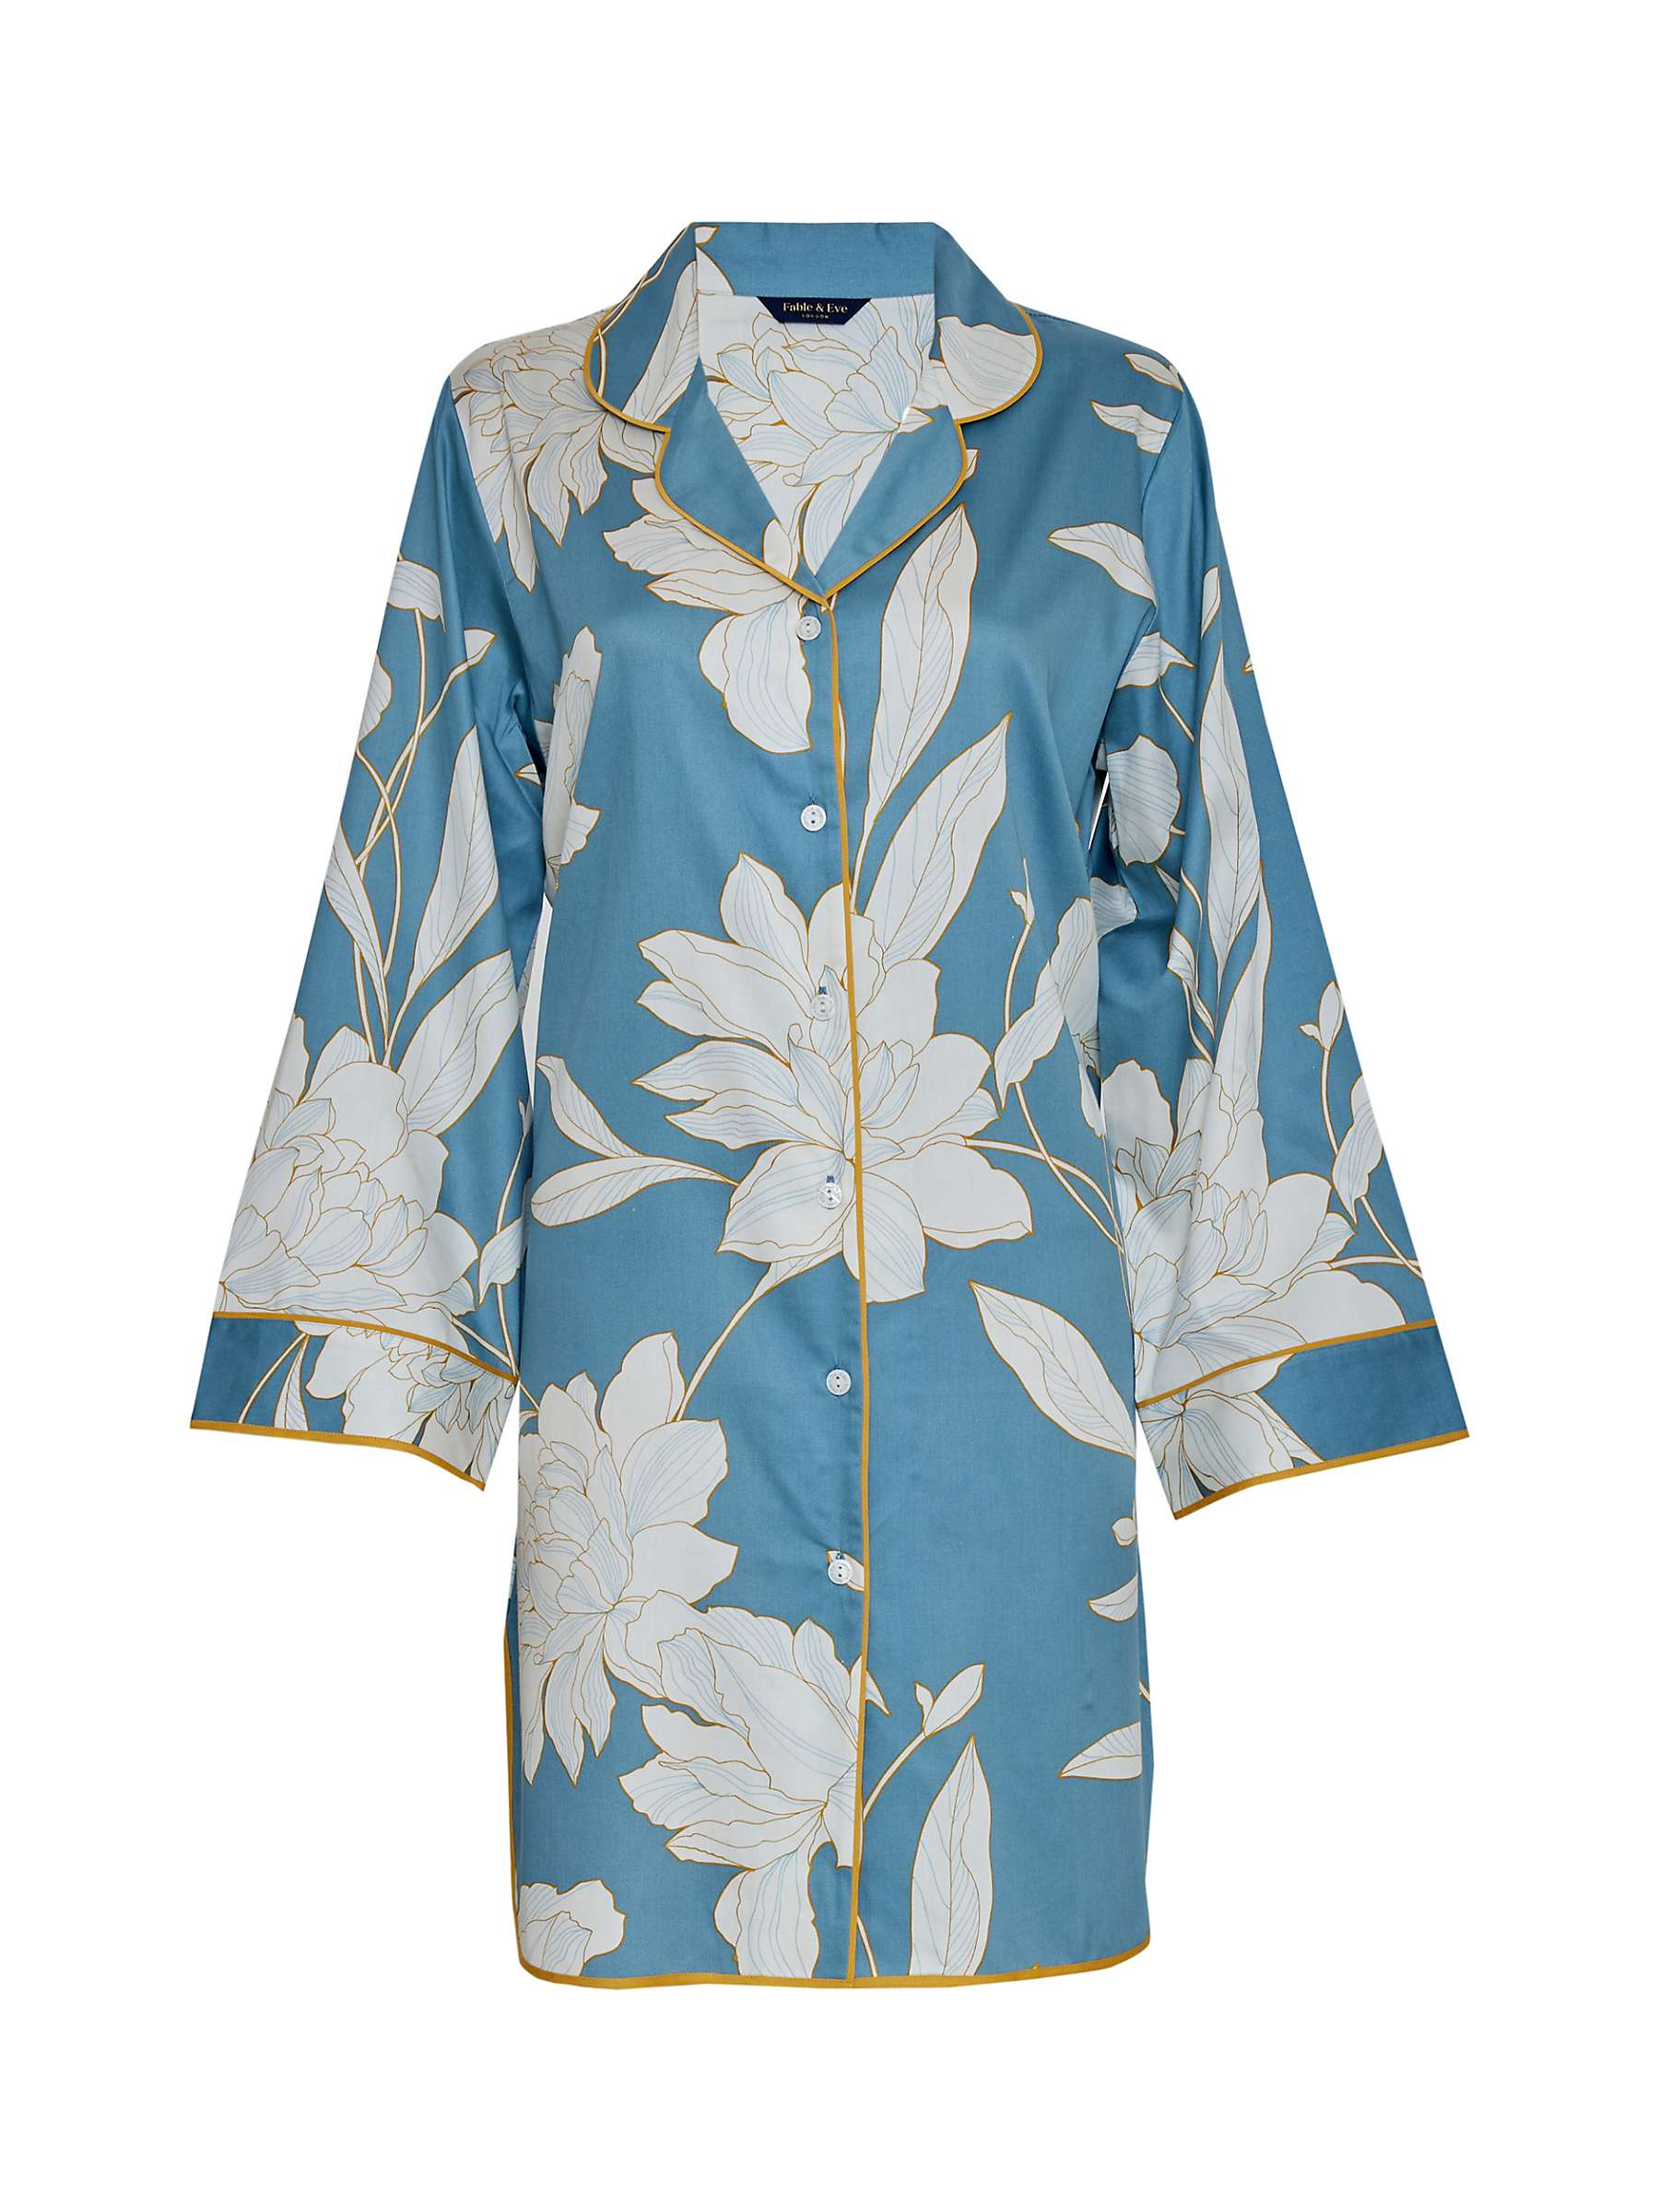 Buy Fable & Eve Greenwich Floral Nightshirt, Cerulean Blue Online at johnlewis.com